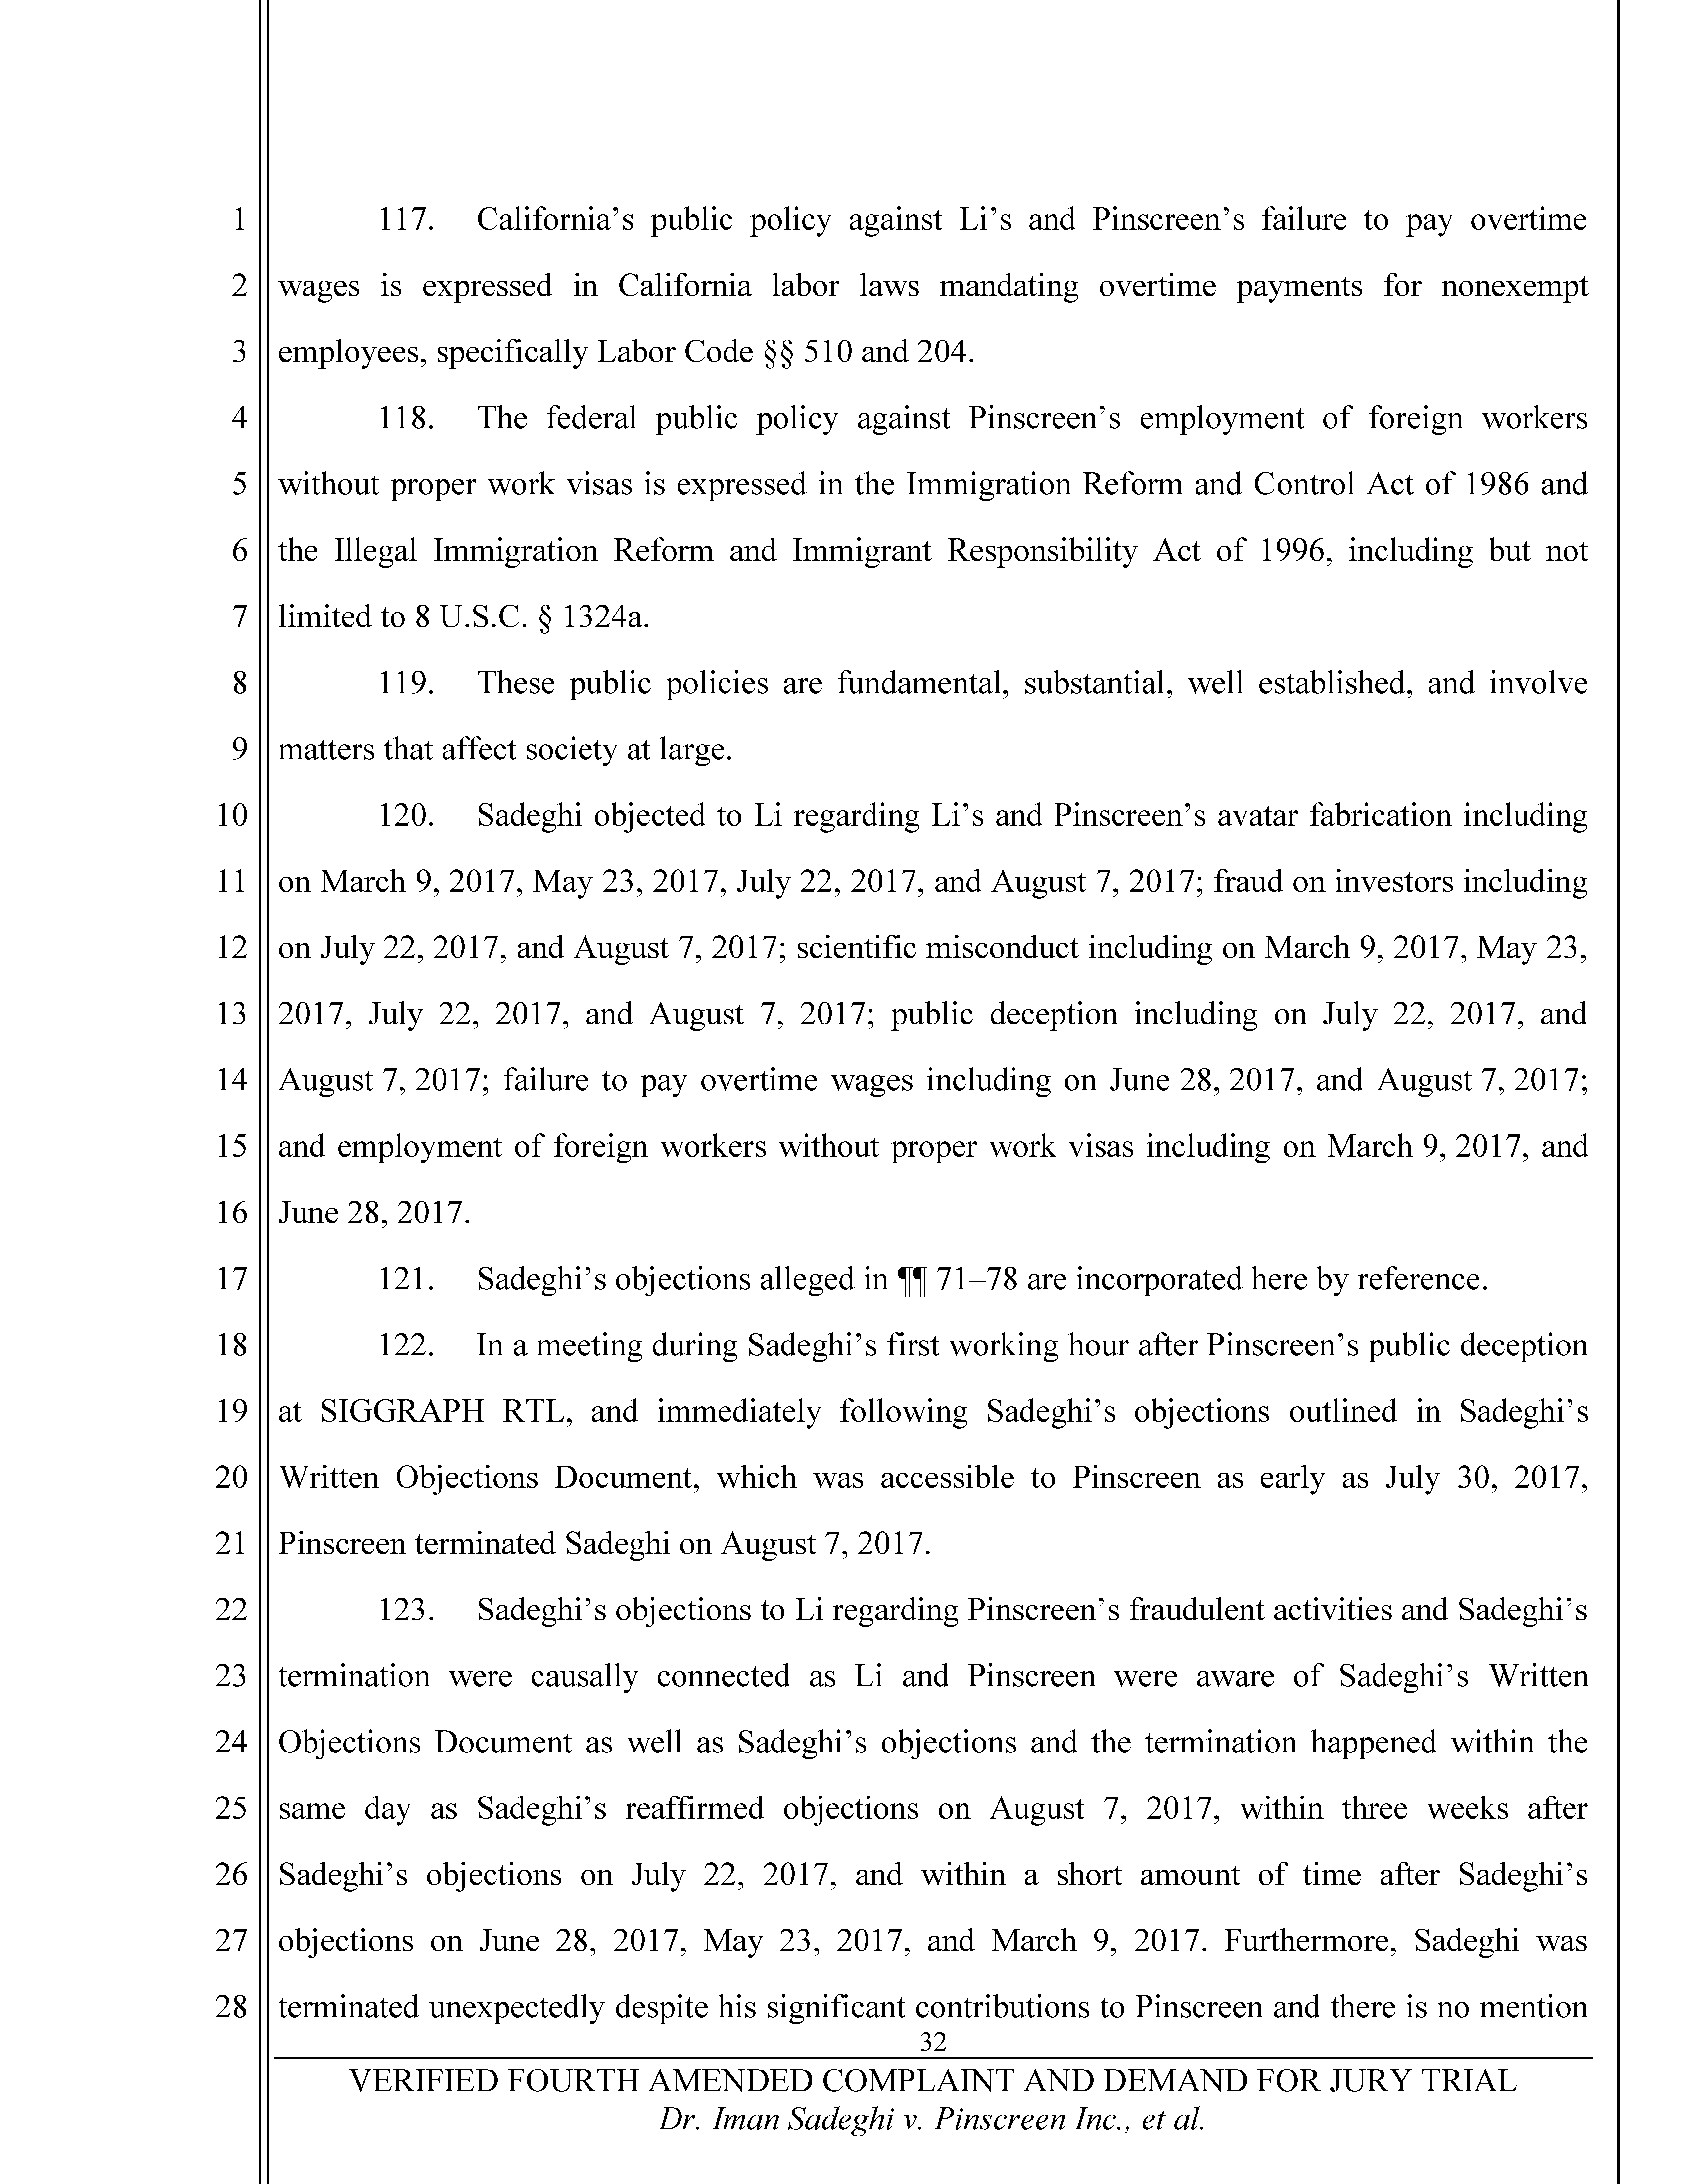 Fourth Amended Complaint (4AC) Page 33